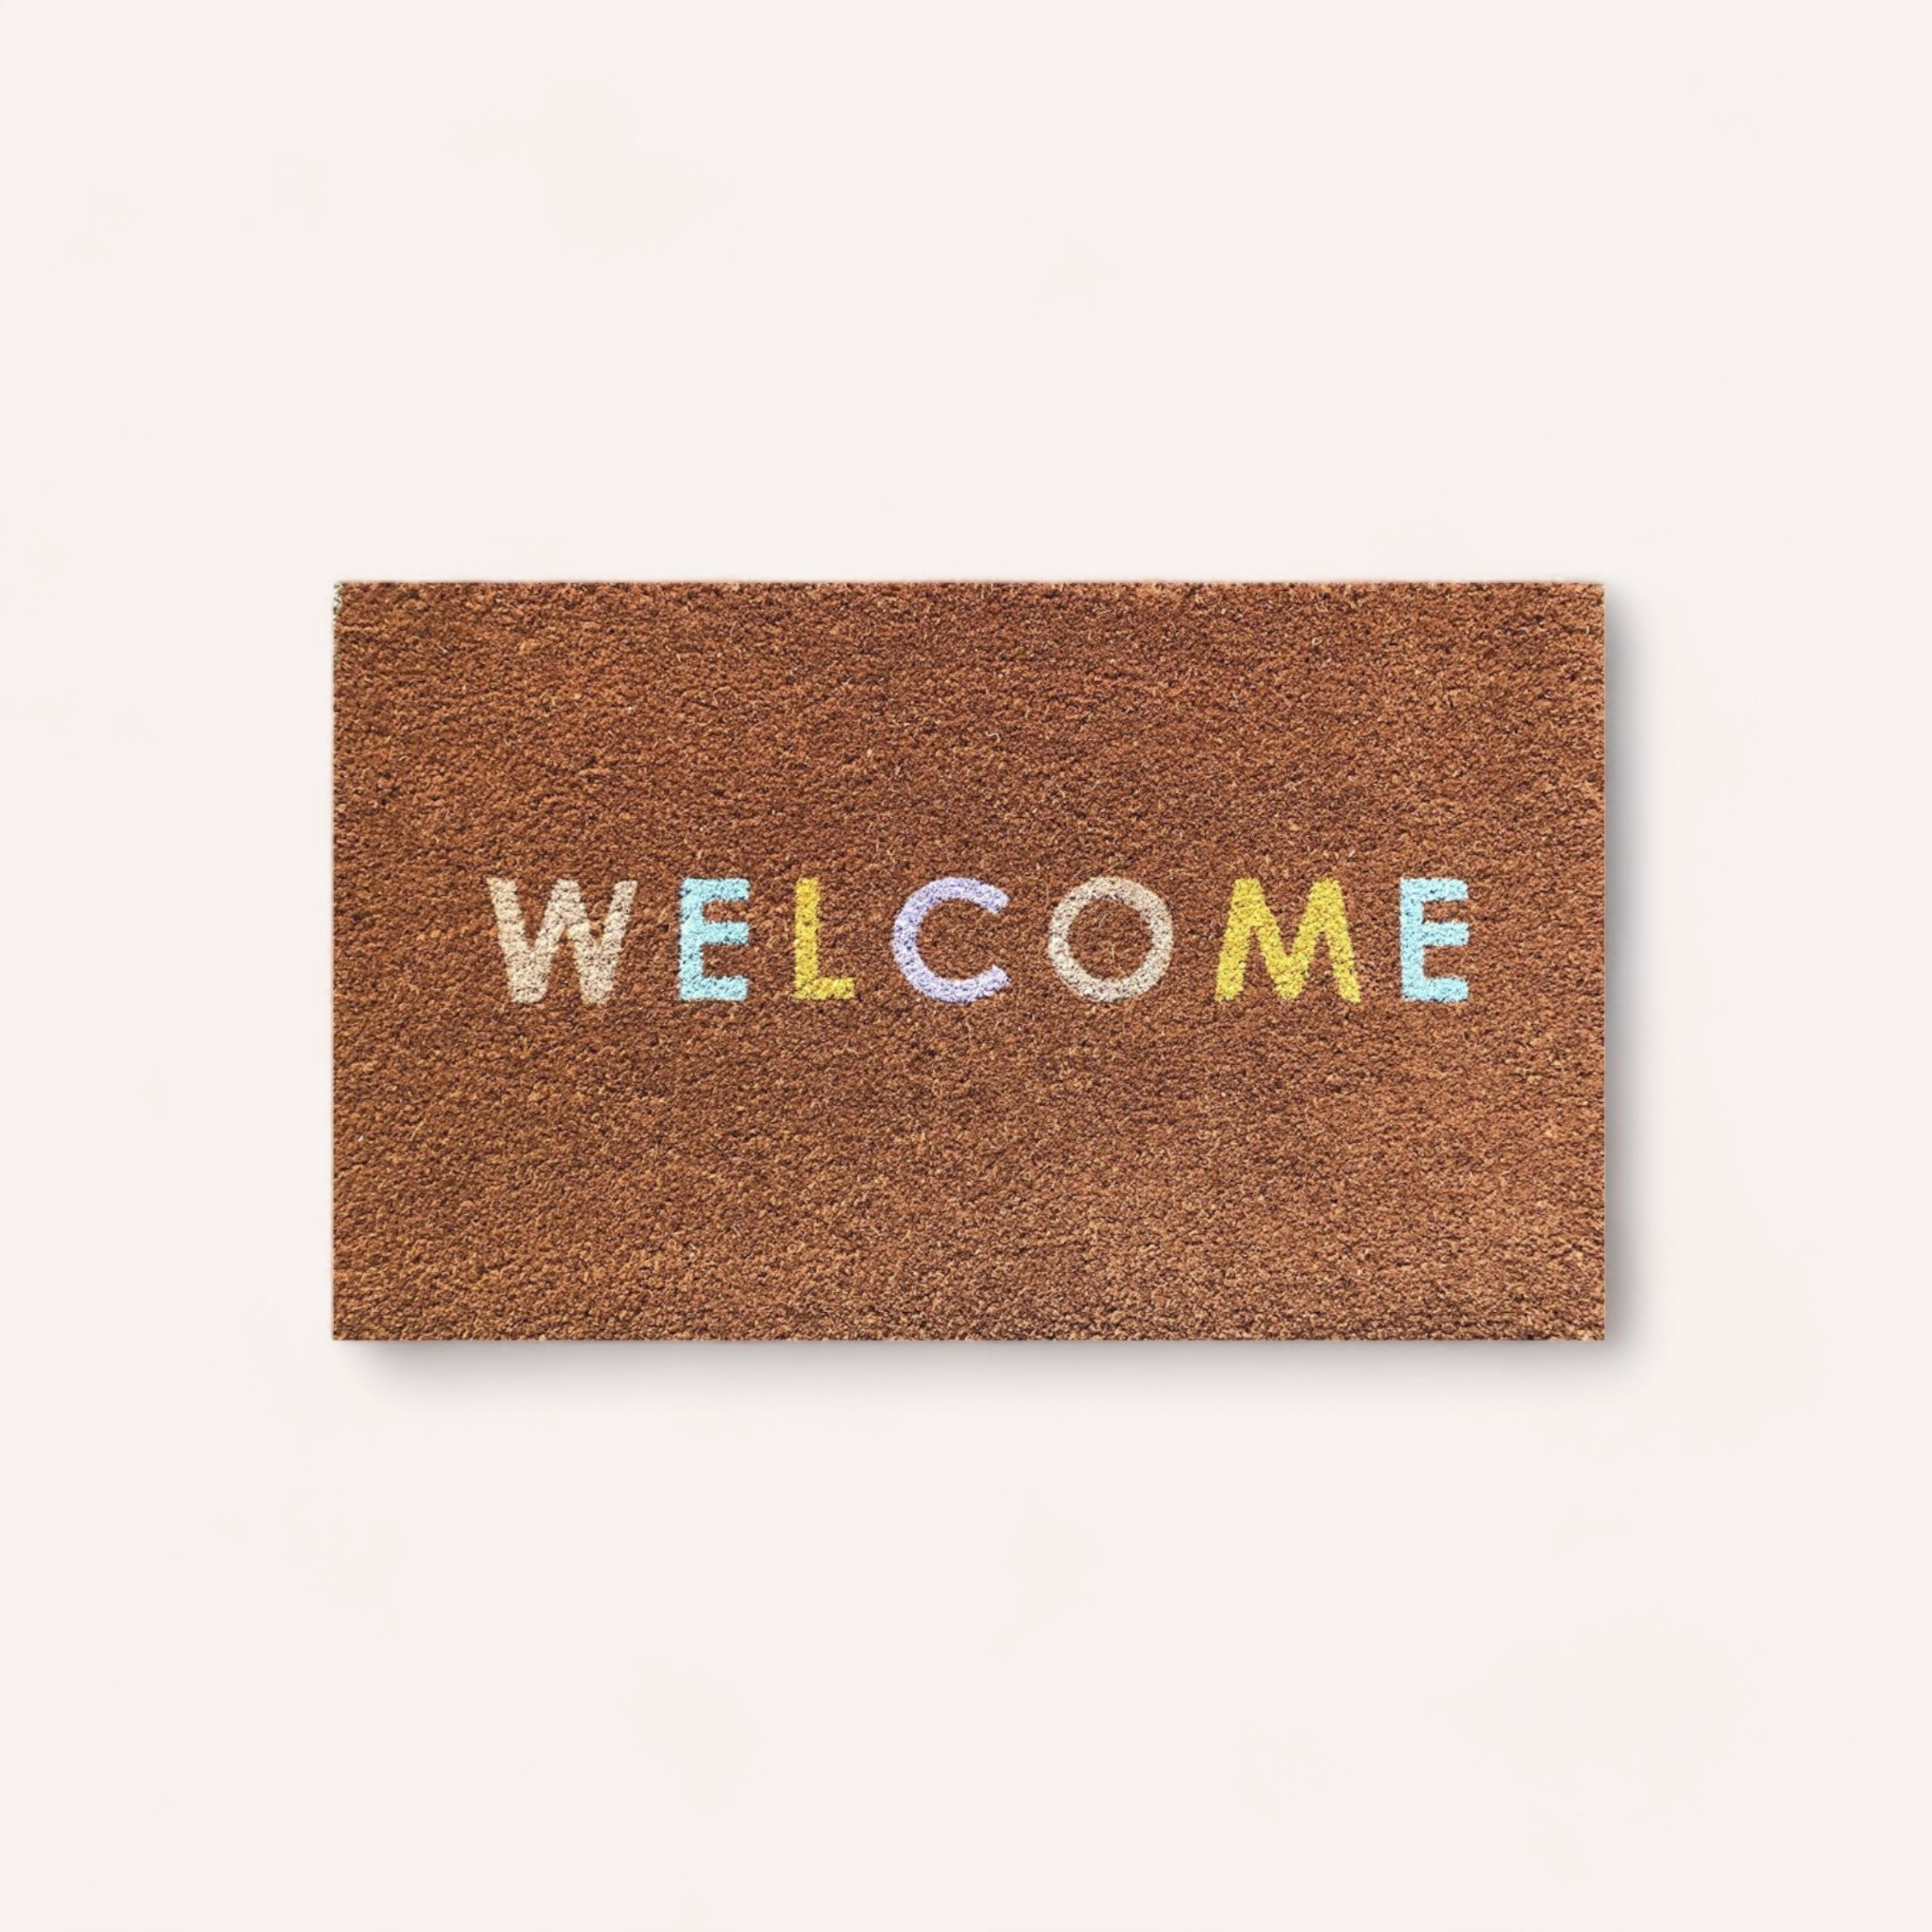 A colorful "welcome" text on a brown coir doormat with rubber backing against a white background, featuring the Welcome Doormat by PottedNZ.